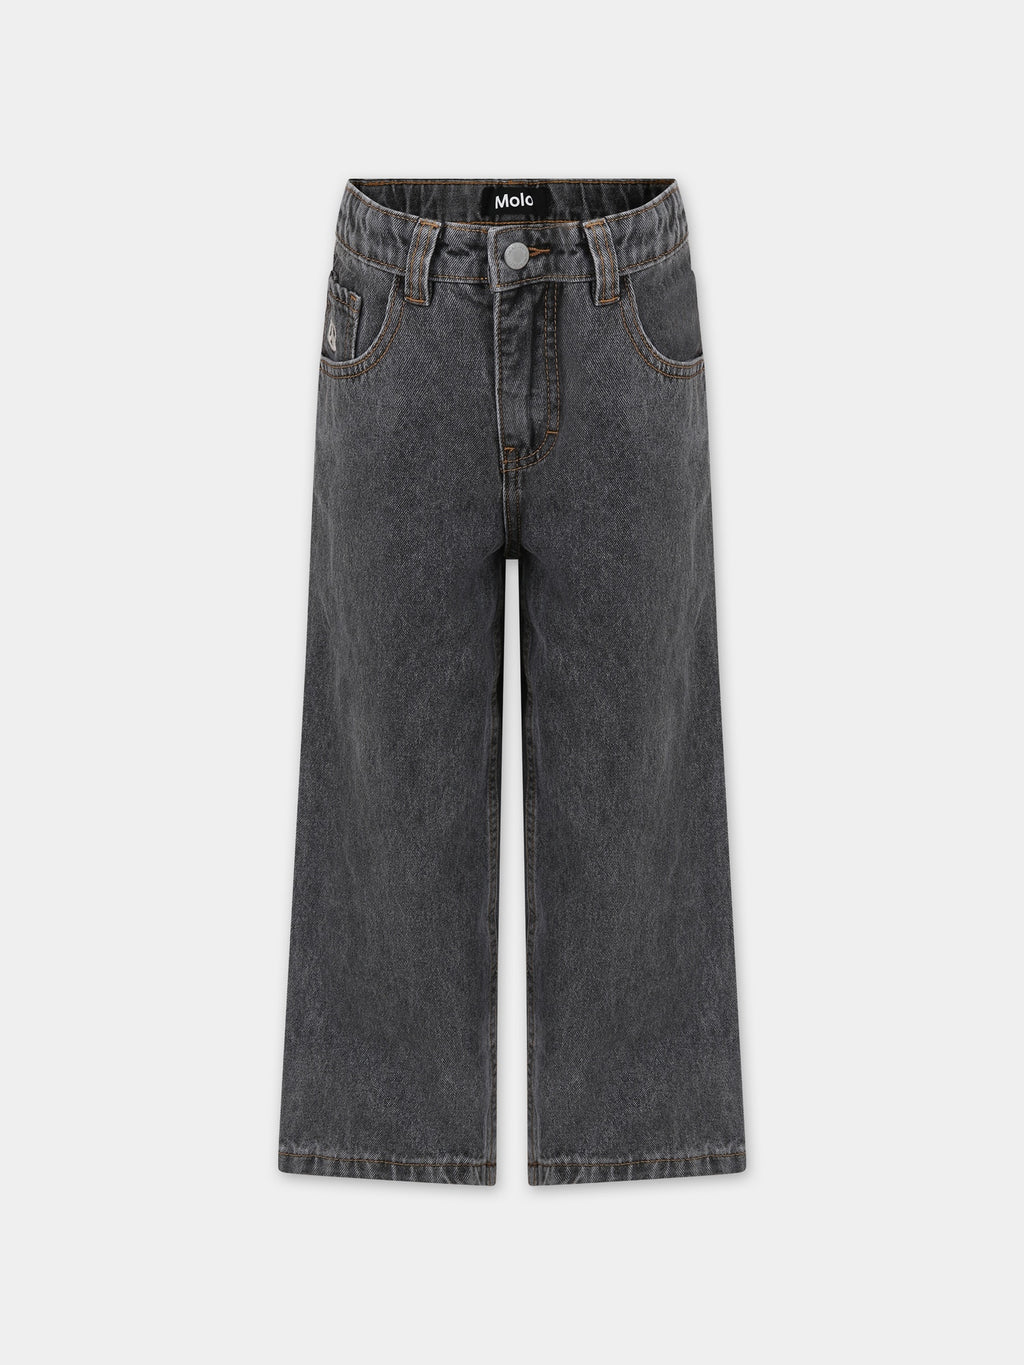 Grey jeans for boy with logo